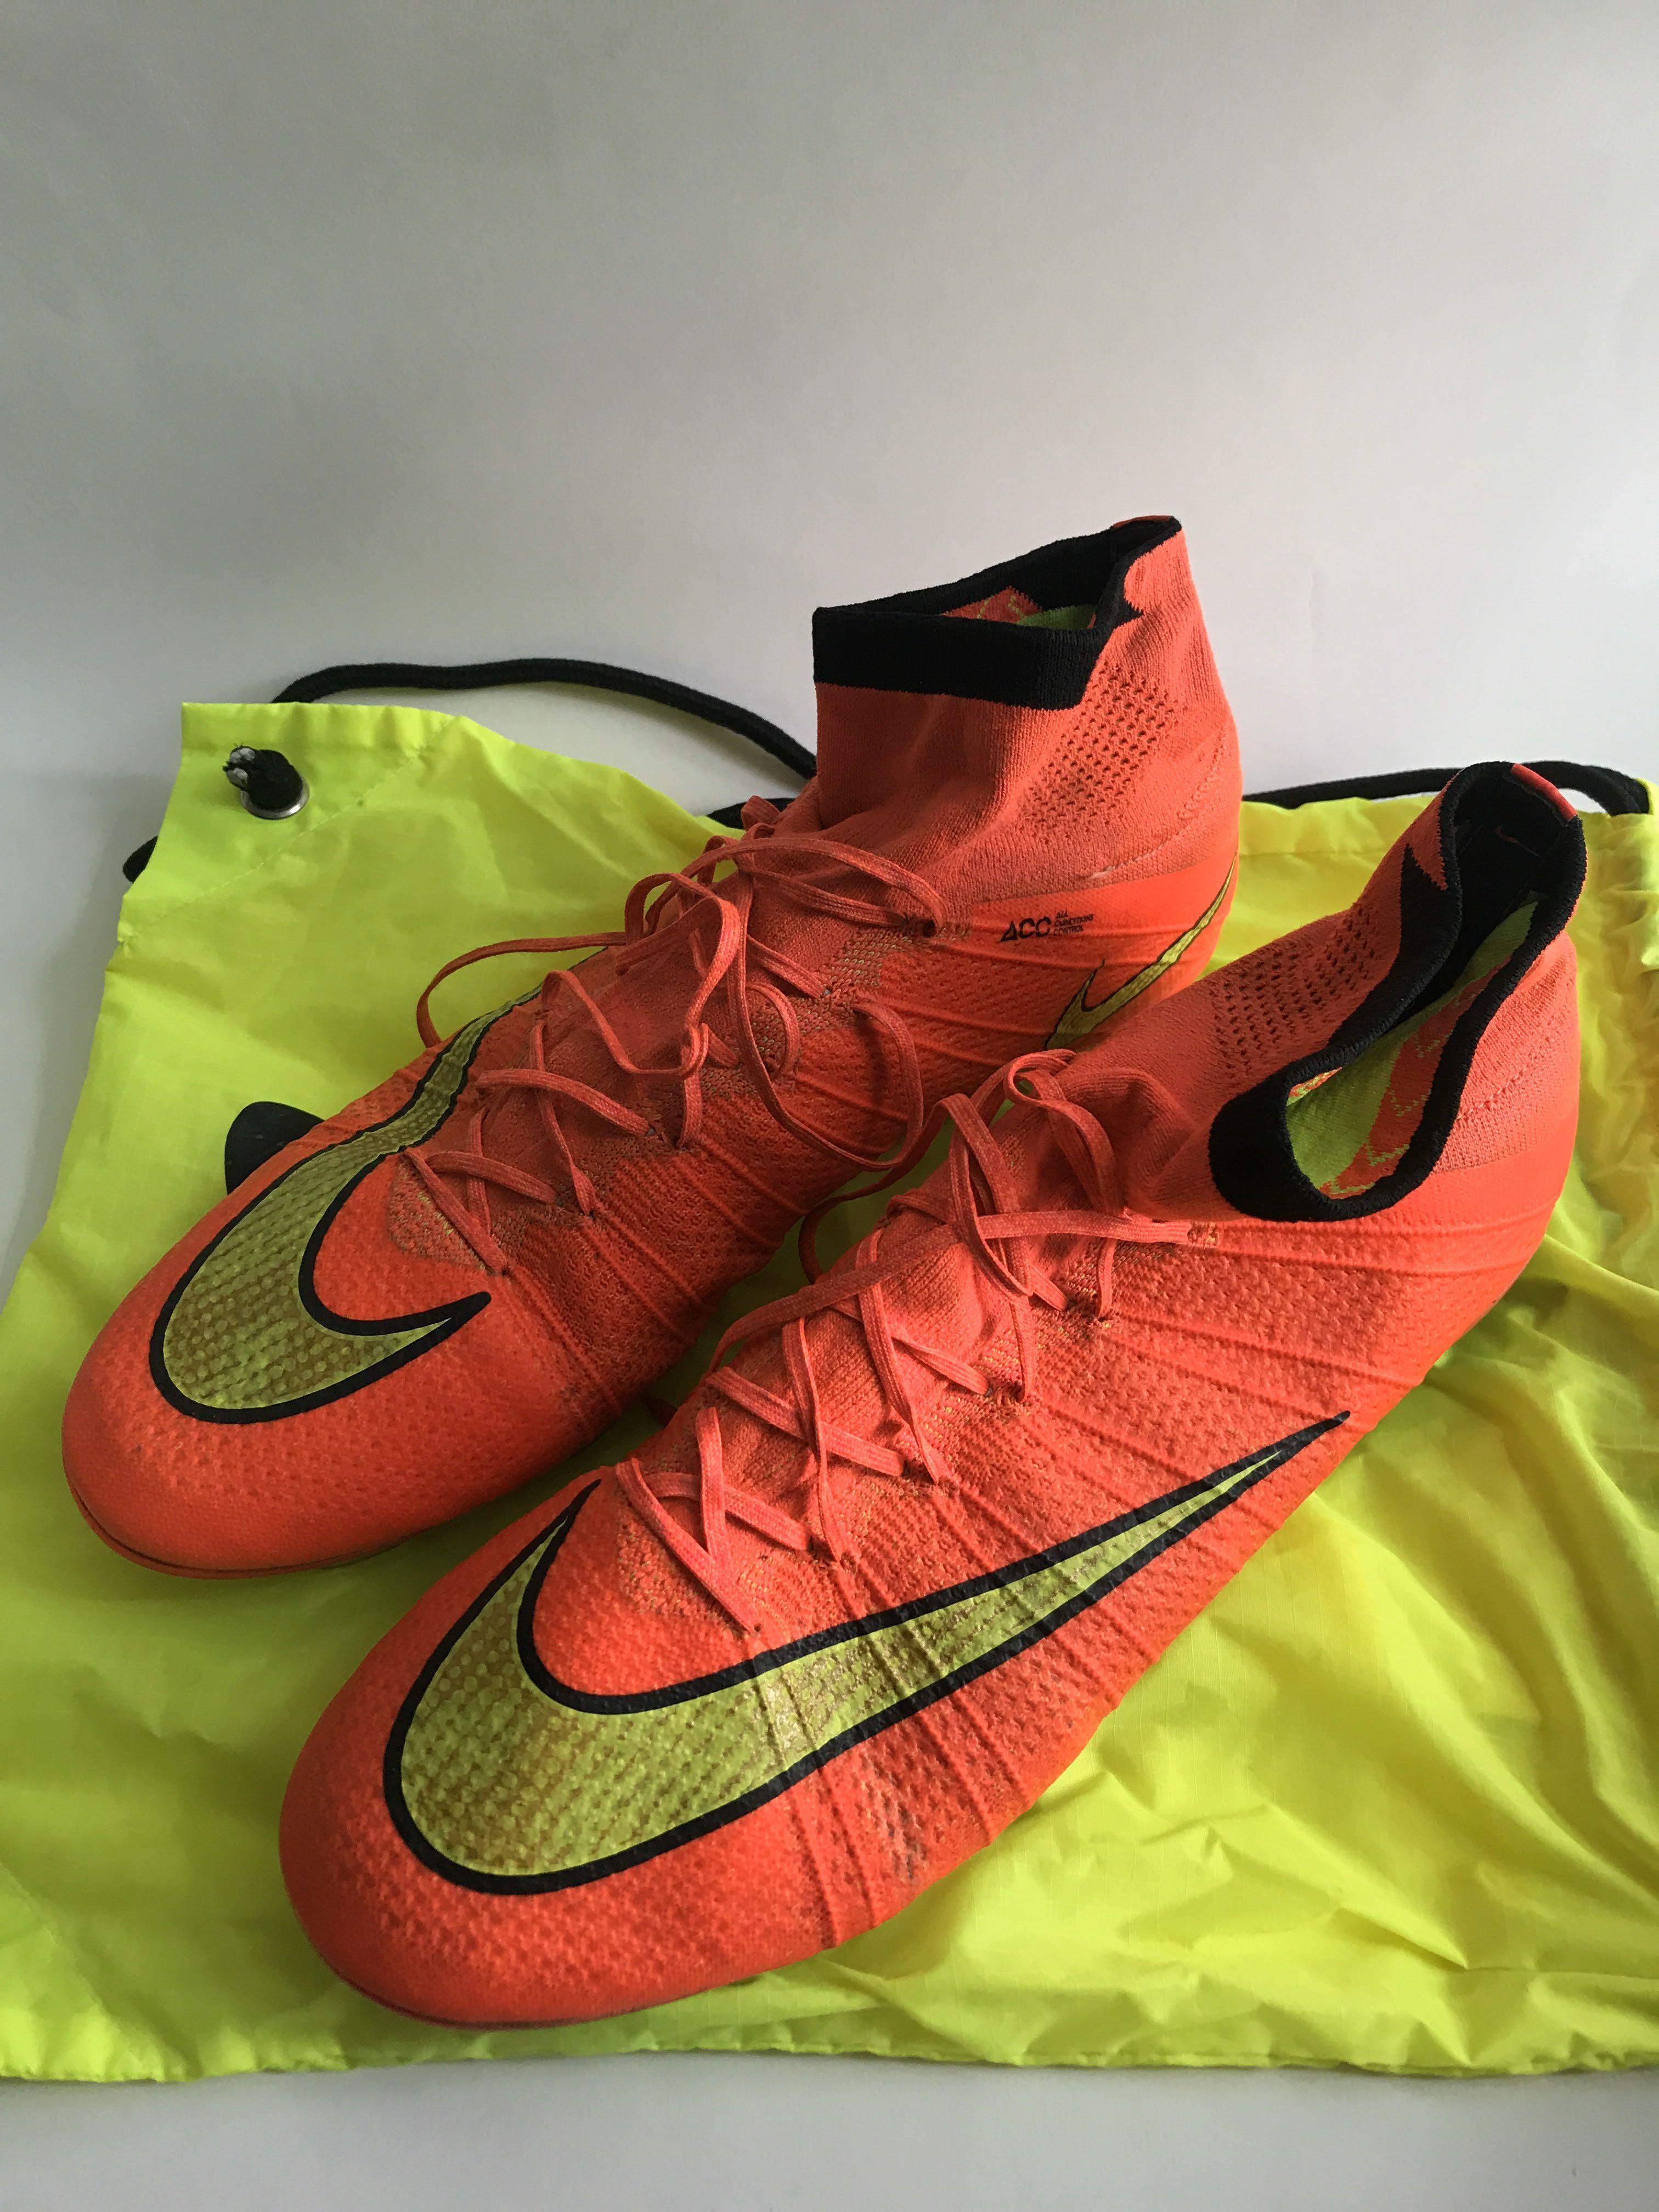 bomba Sollozos Marcar Nike Mercurial Vapor Superfly 4 2014 soccer boots, Sports Equipment, Sports  & Games, Racket & Ball Sports on Carousell